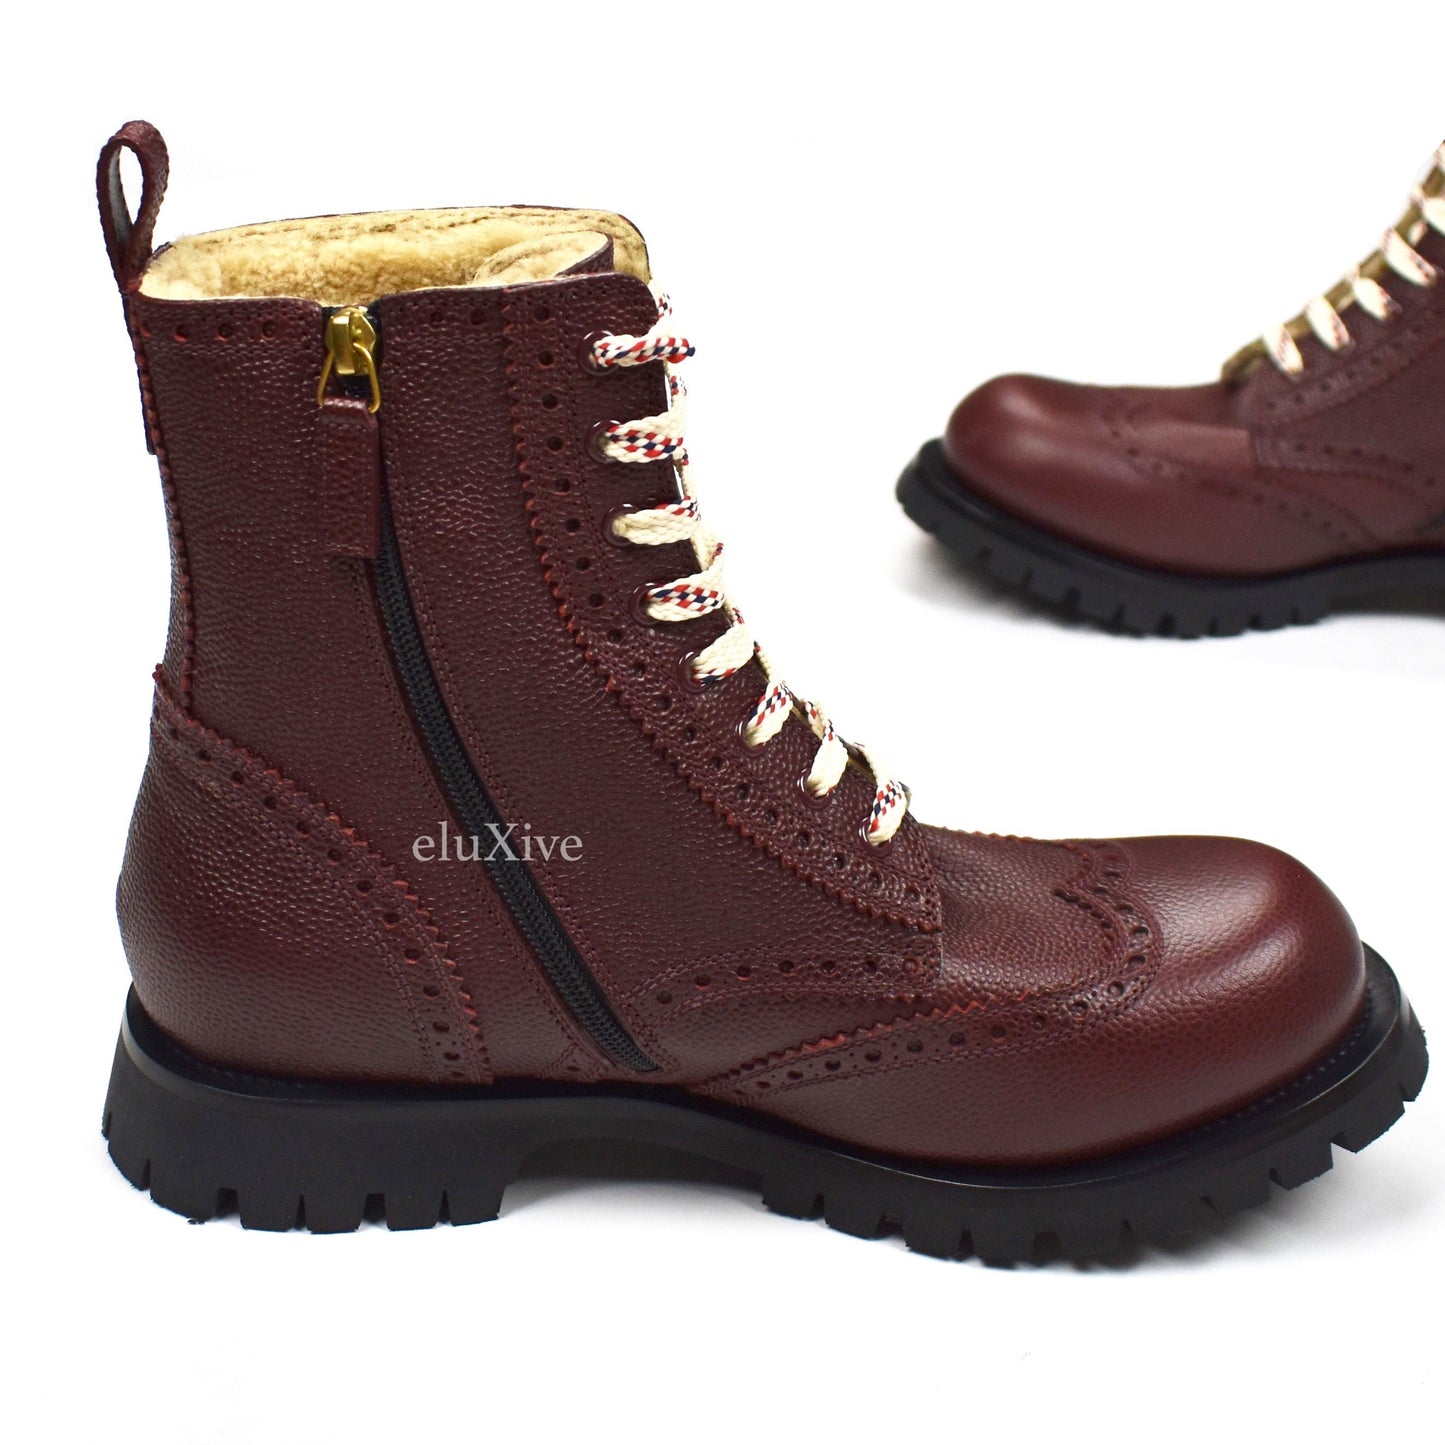 Gucci - Dark Red Pebbled Shearling Leather 'Arley' Hiking Boots